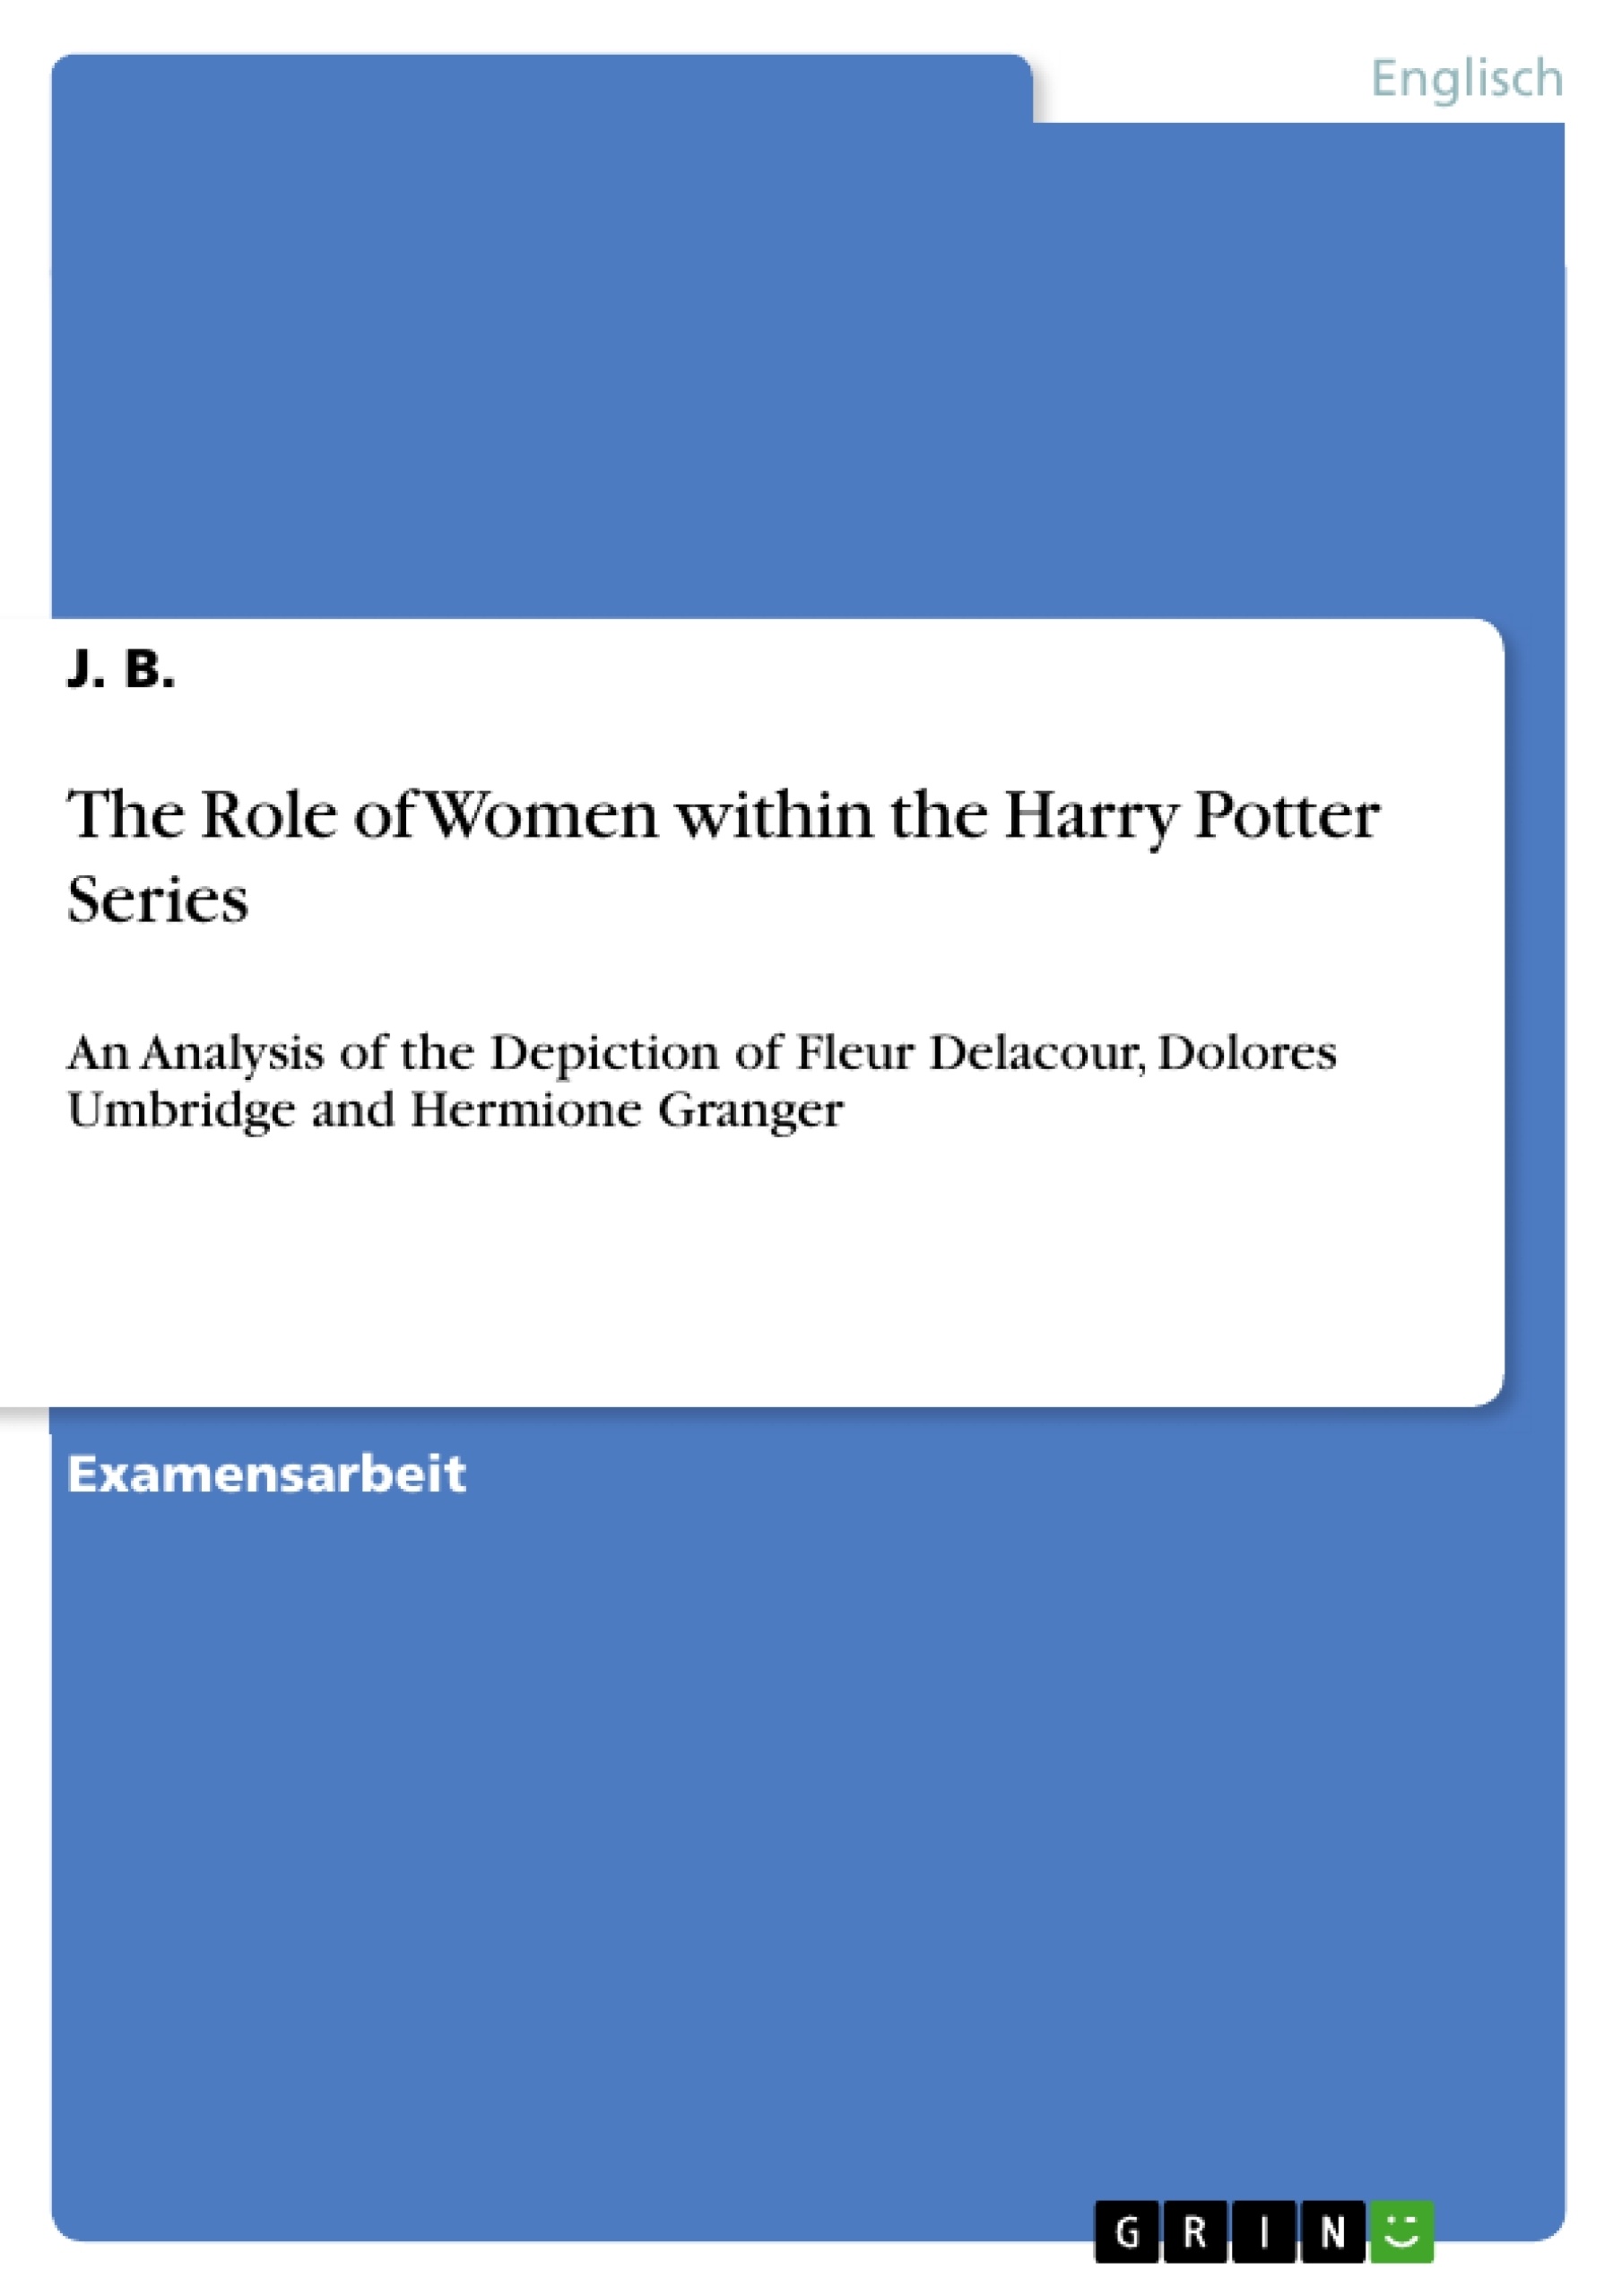 Título: The Role of Women within the Harry Potter Series